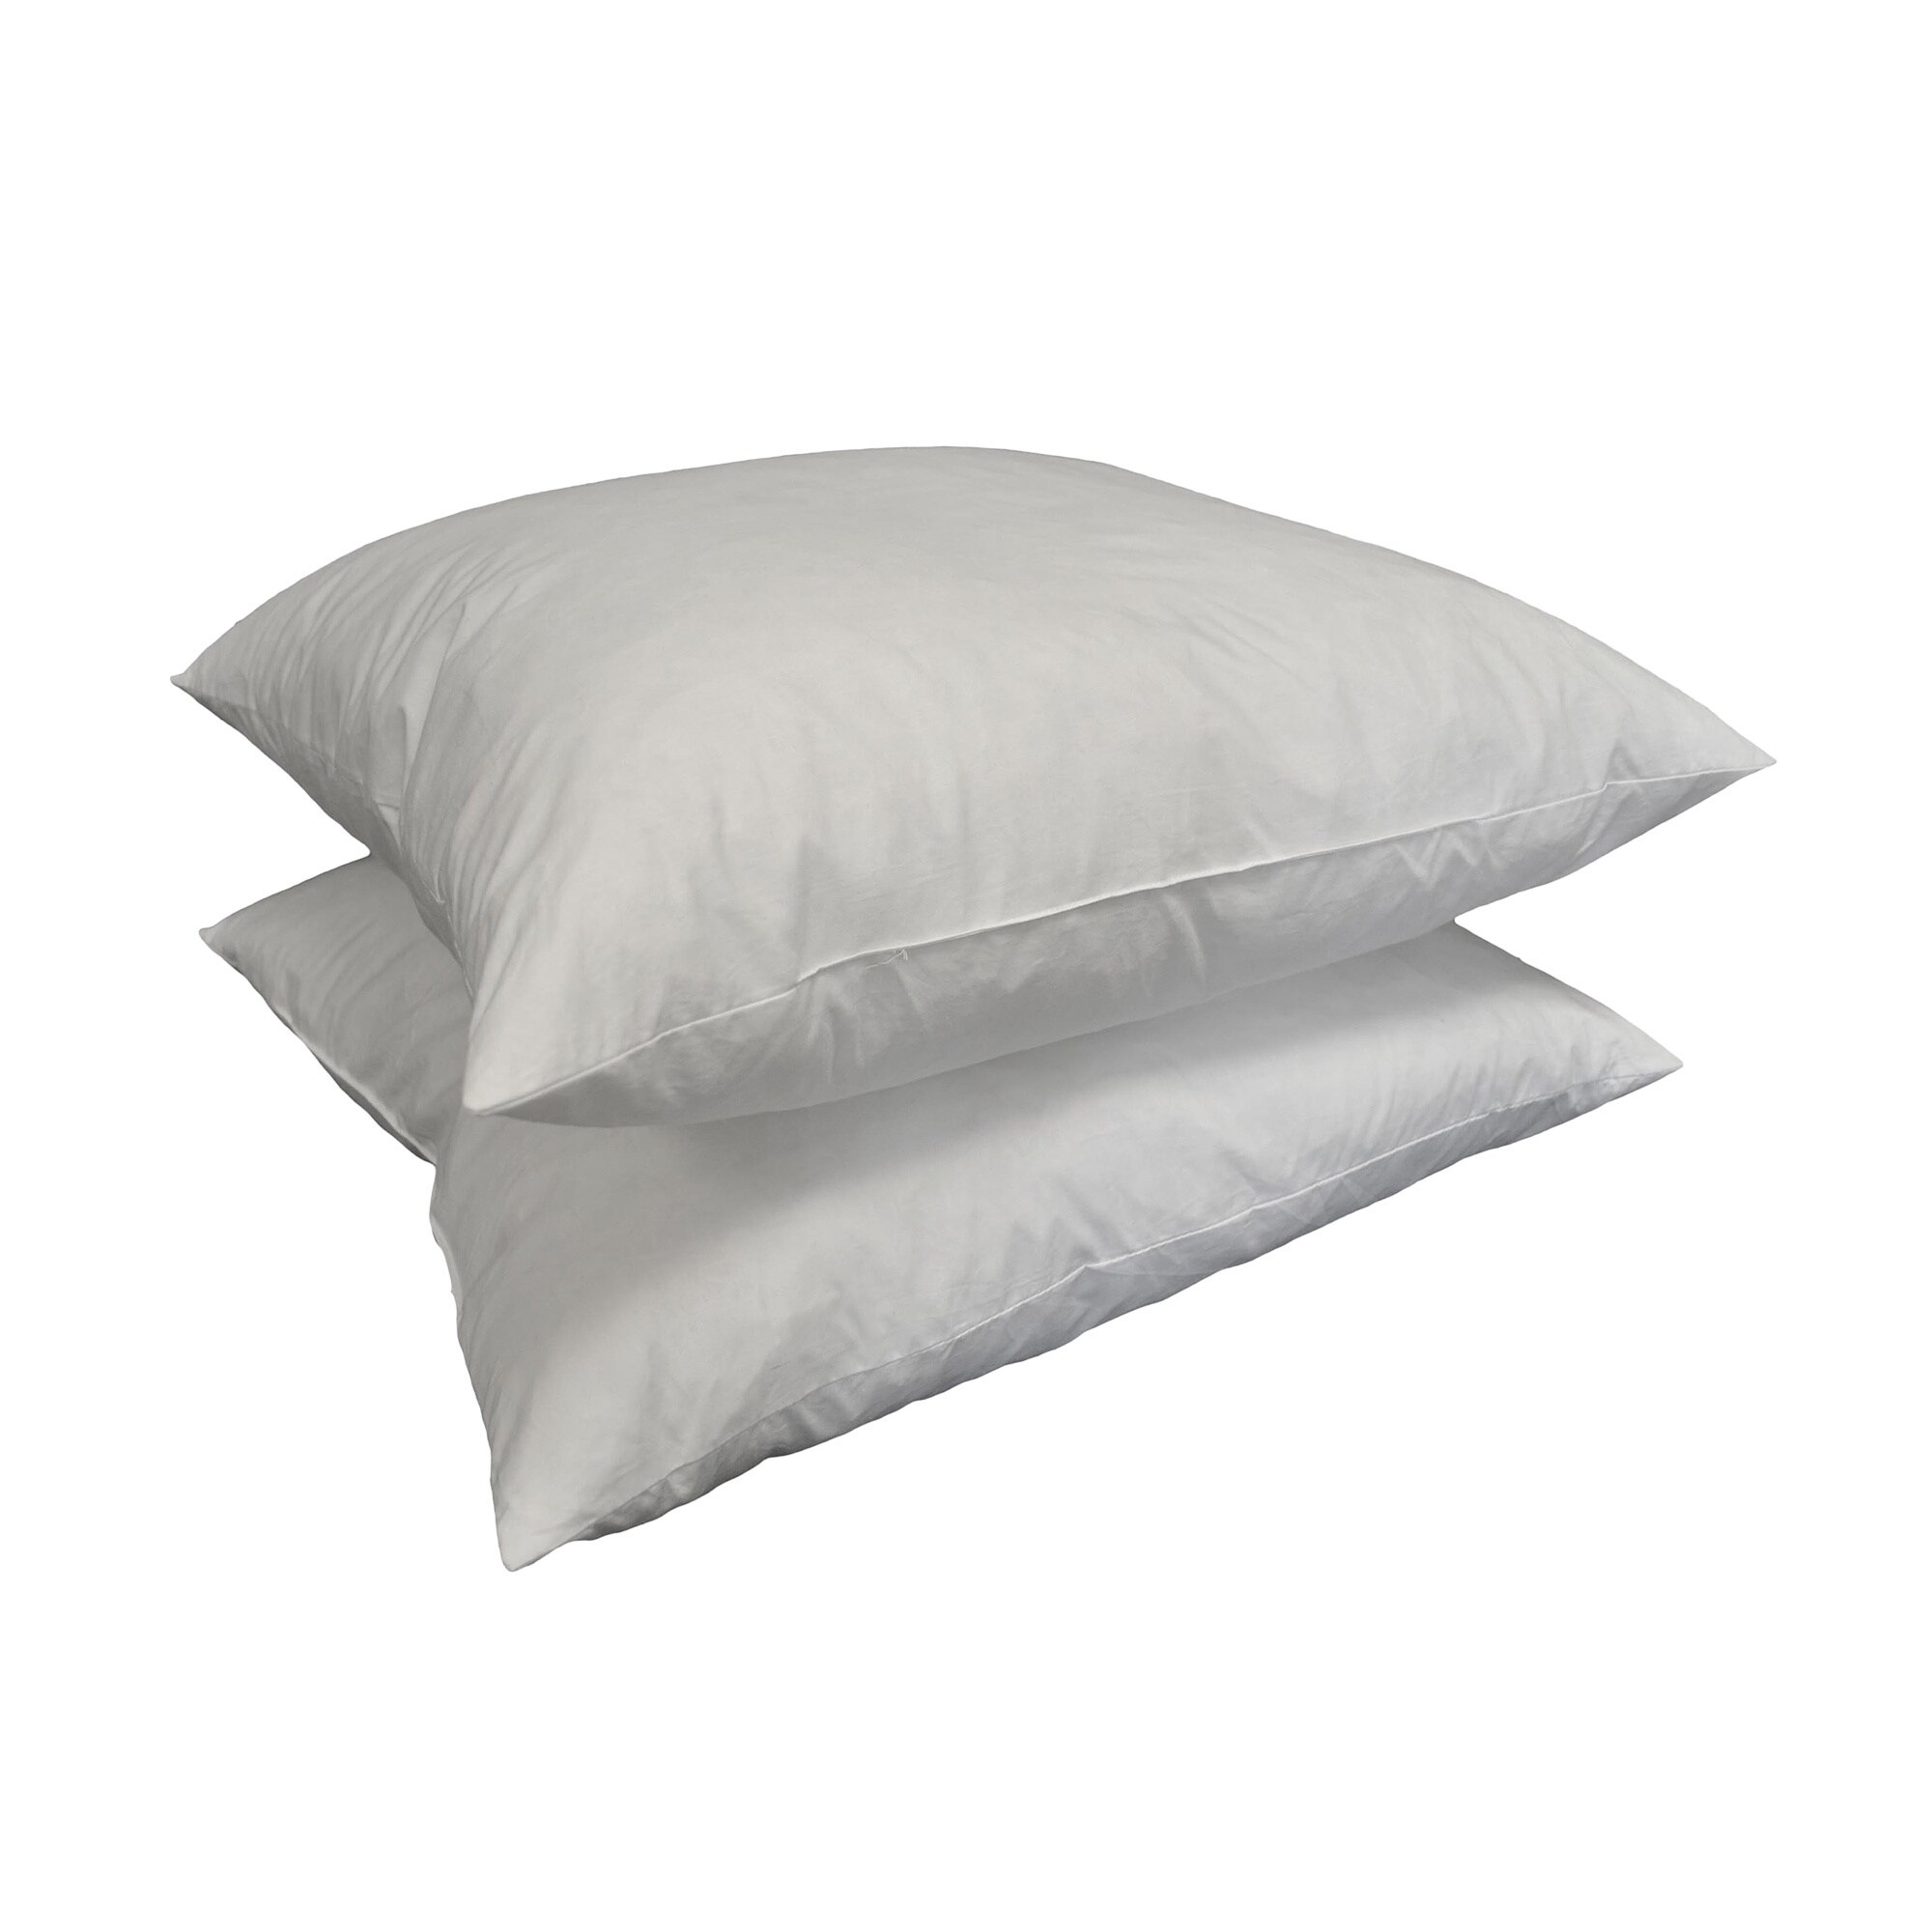 Shop Euro Square 26 X 26 Inch Feather Pillow Insert Set Of 2